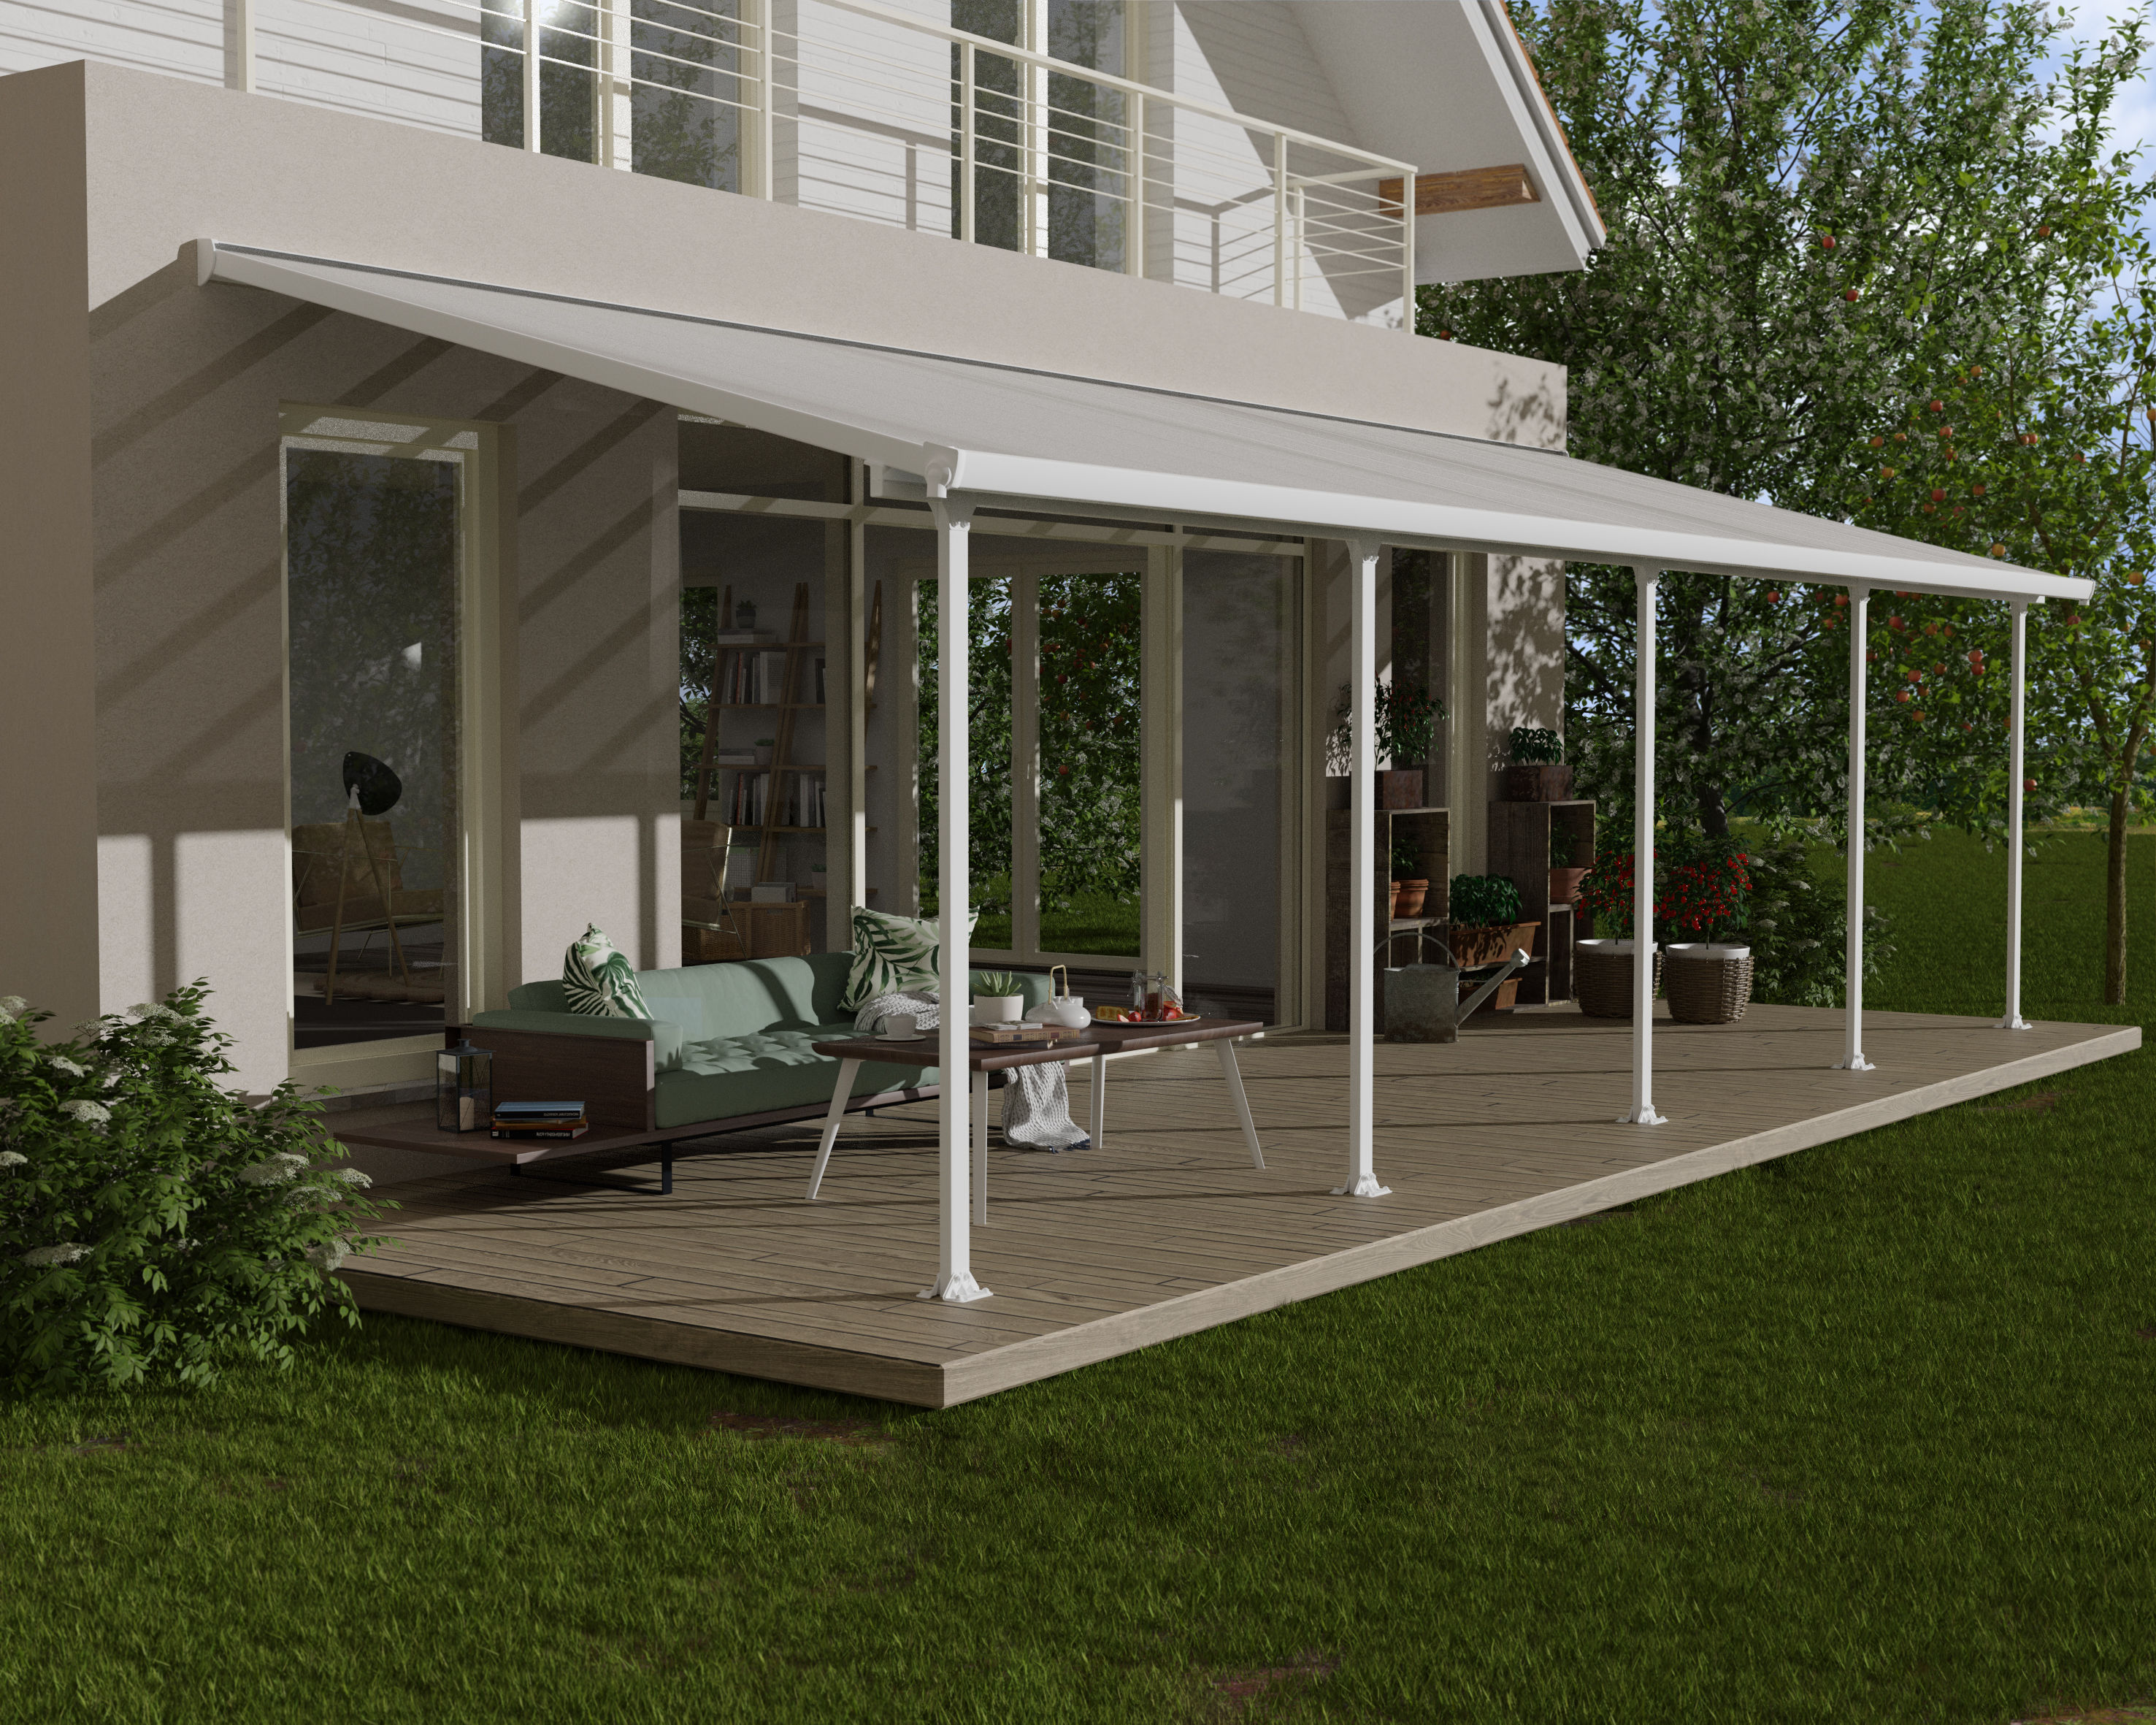 Olympia 10 ft. x 32 ft. Patio Cover Kit - Canopia